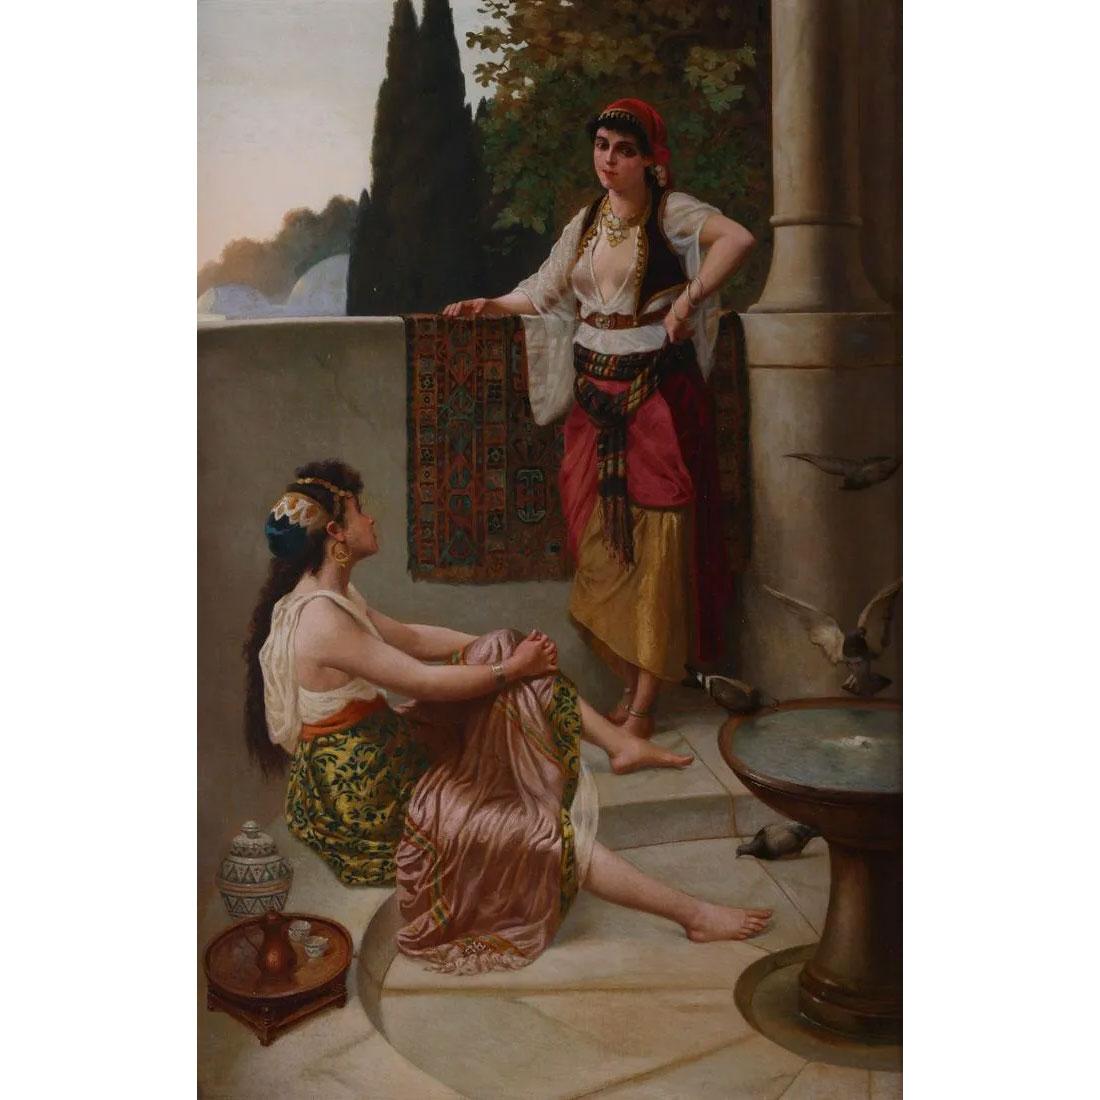 A fine orientalist painting of two women in a harem by Stiepevich

A fine orientalist oil painting depicting two women conversing in a harem.
Artist: Vincent G. Stiepevich (Russo-American, 1841-1910)
Date: 19th Century
Medium: Oil on